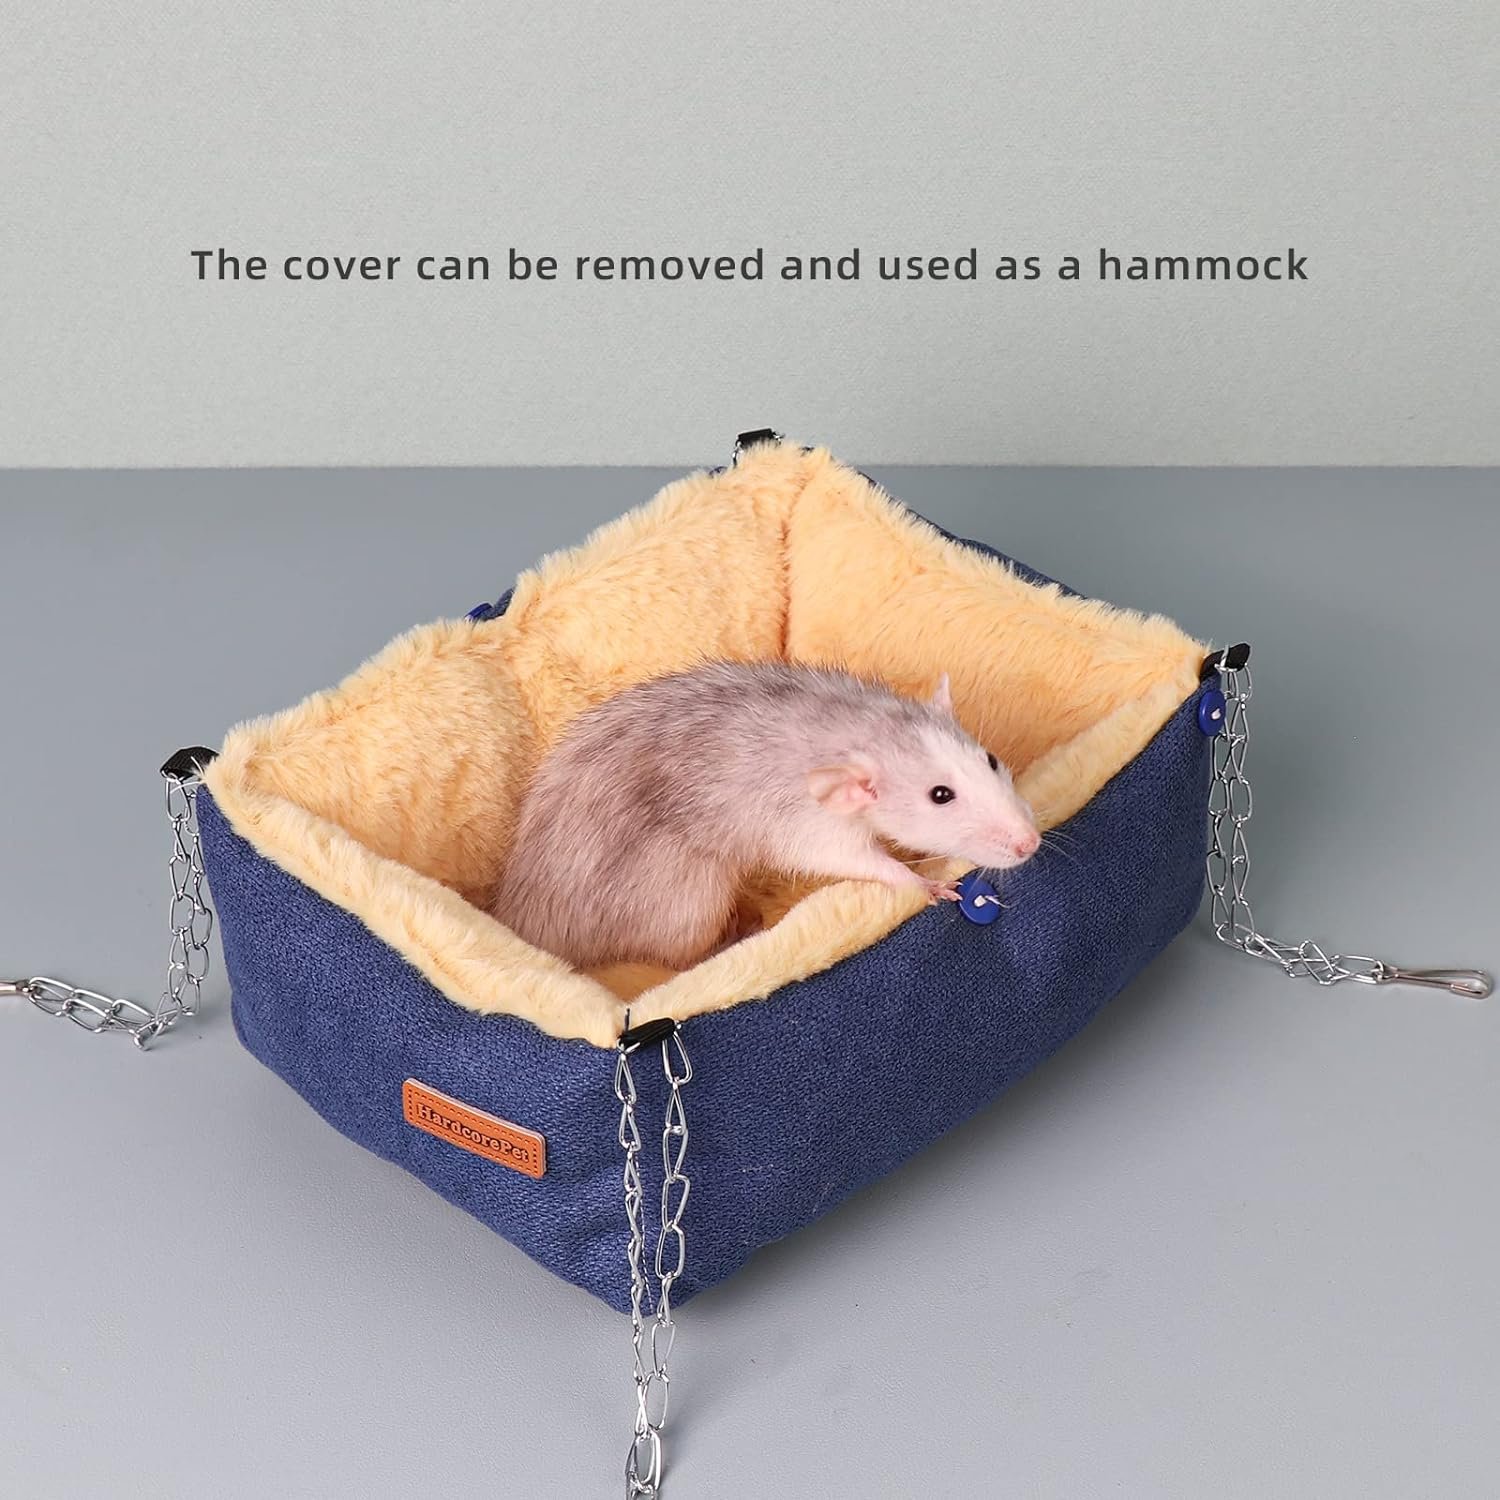 Rat Hammock for Cage, Guinea Pig Hideout Small Animal Hammock House Rat Hut, Sugar Gliders Beds Cage Accessories for Chinchilla,Hamster,Rat,Bunny,Squirrel,Gerbil (Blue)